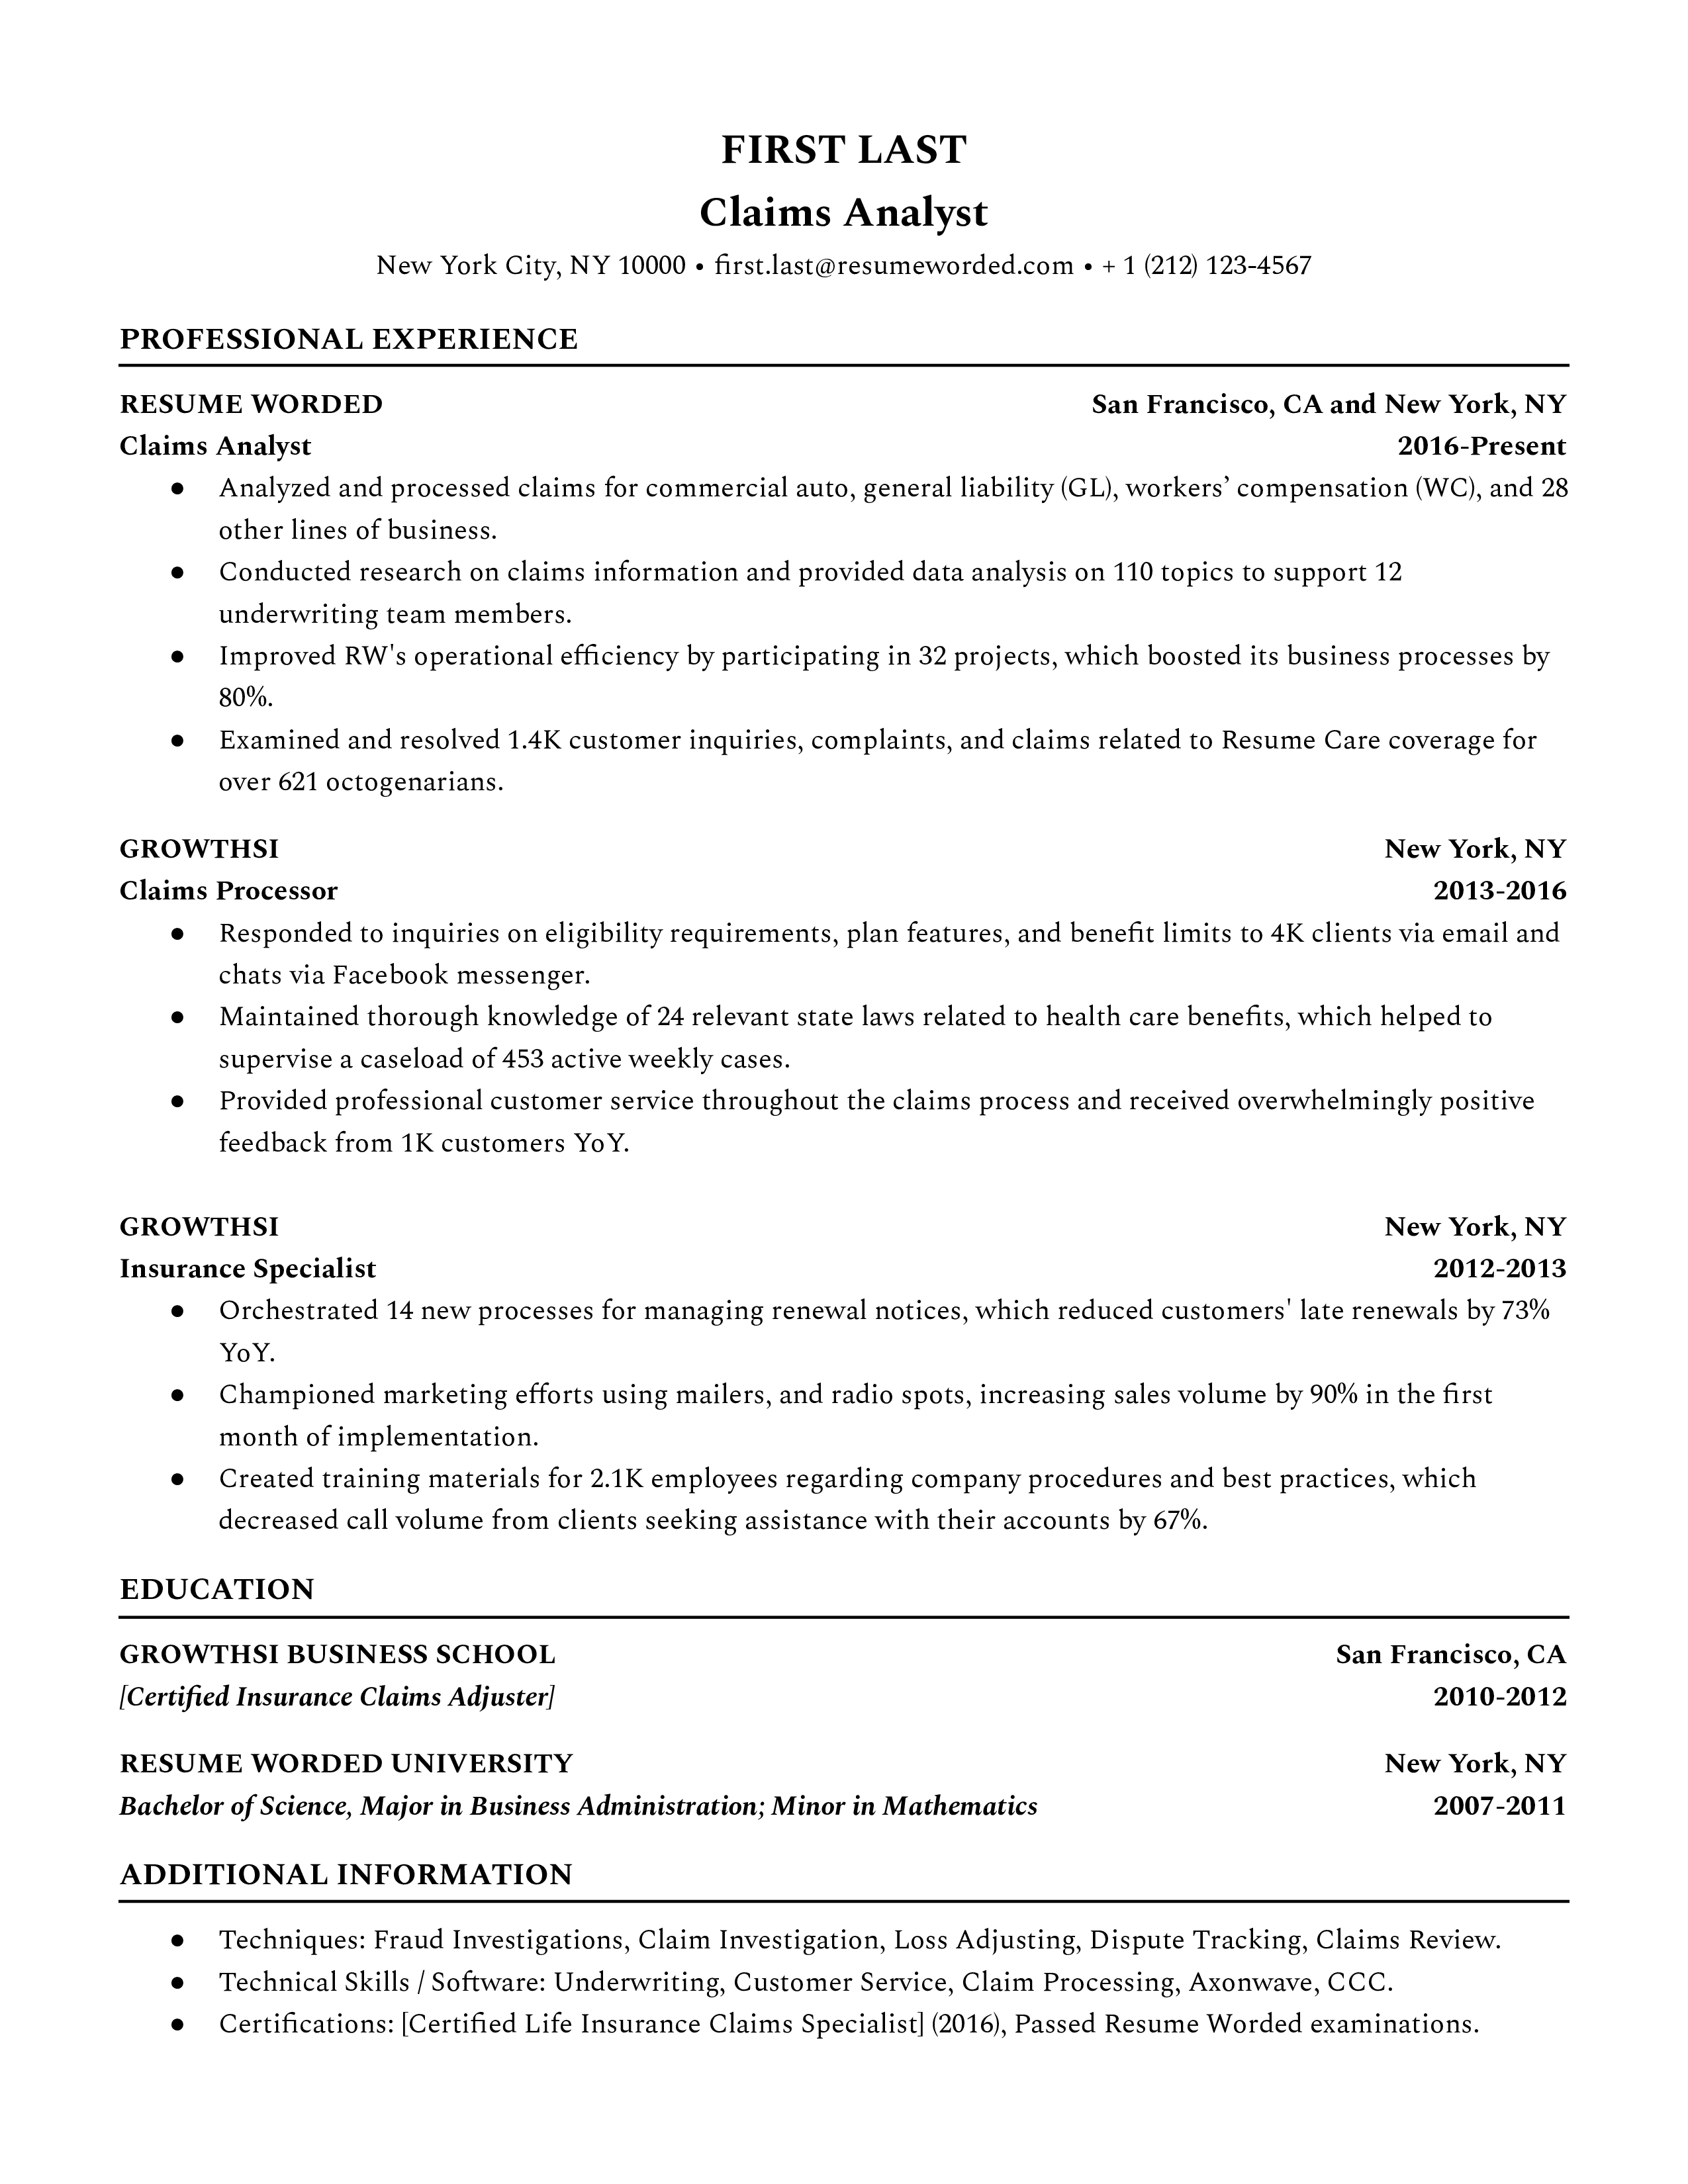 A claim analyst resume sample that highlights the applicant’s strong skills section and extensive experience.